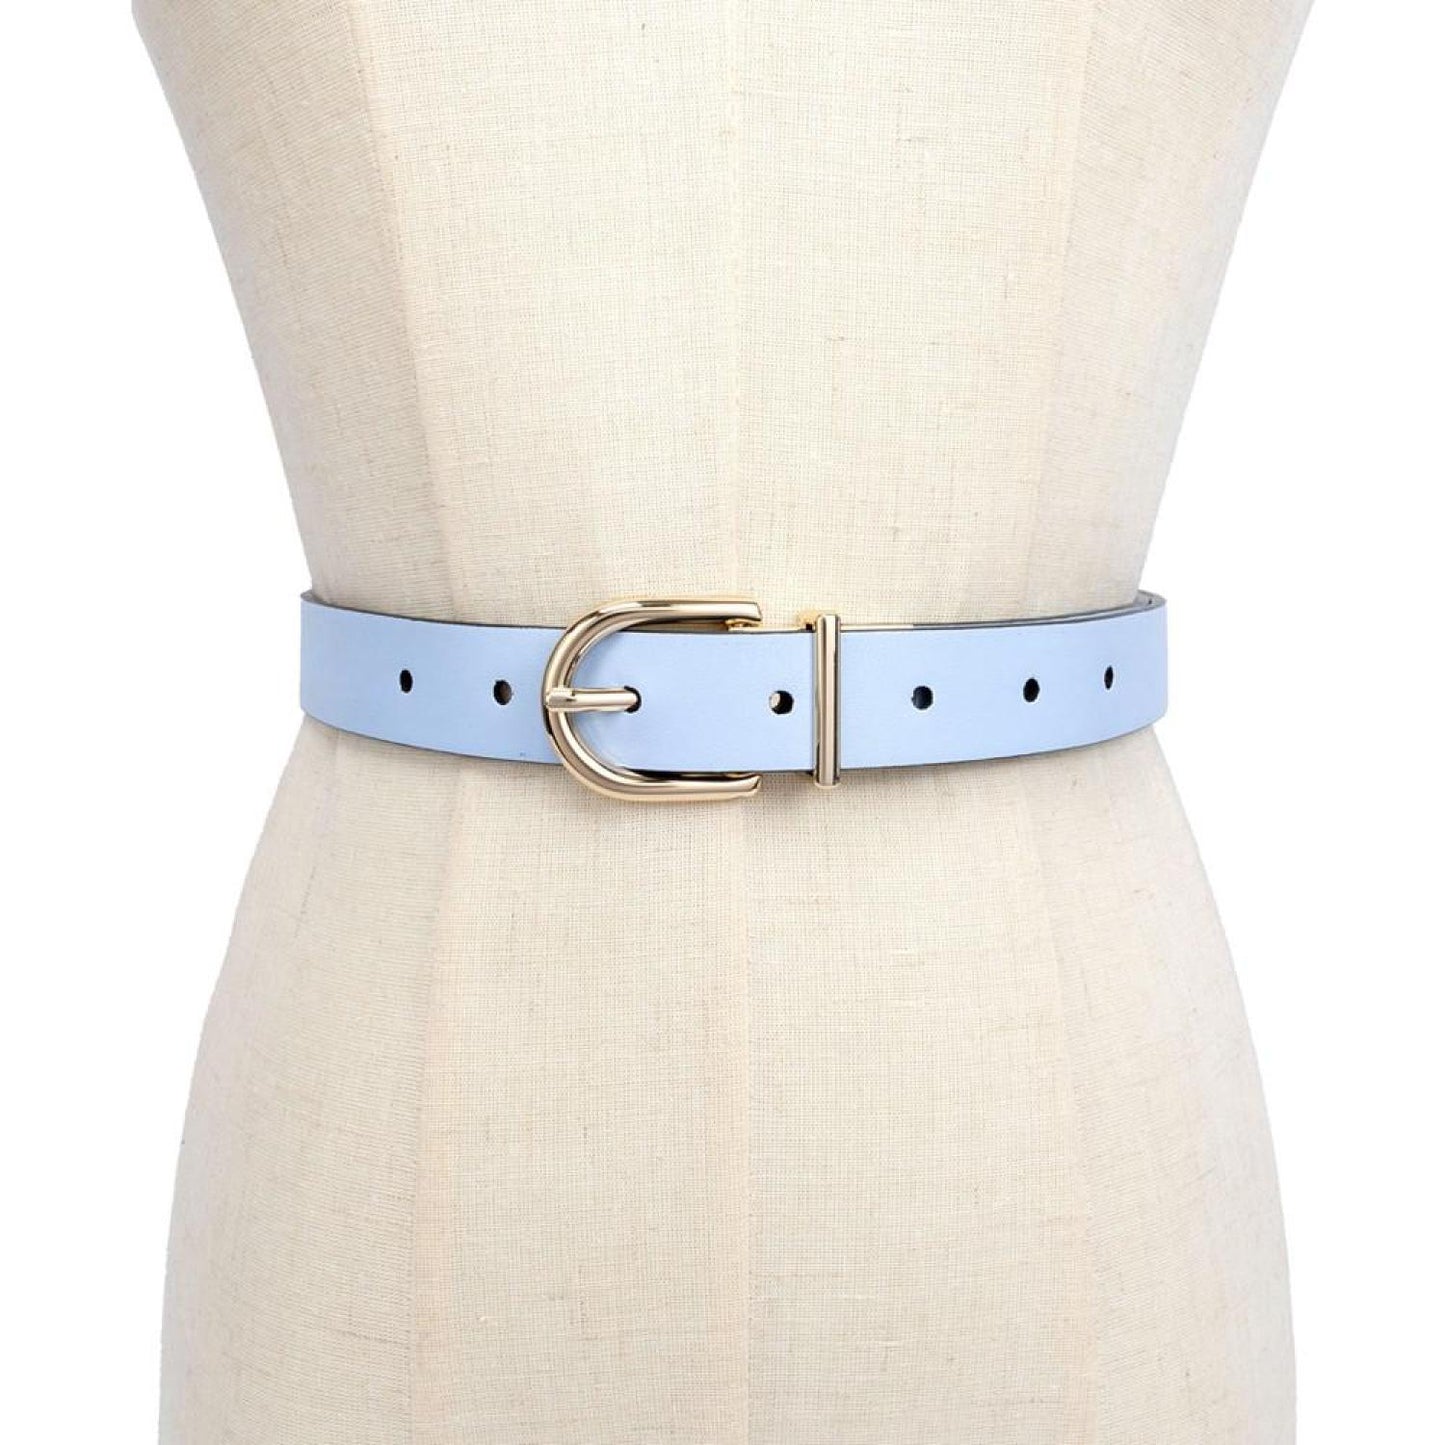 Women's 25mm Reversible Belt, Smooth to Smooth